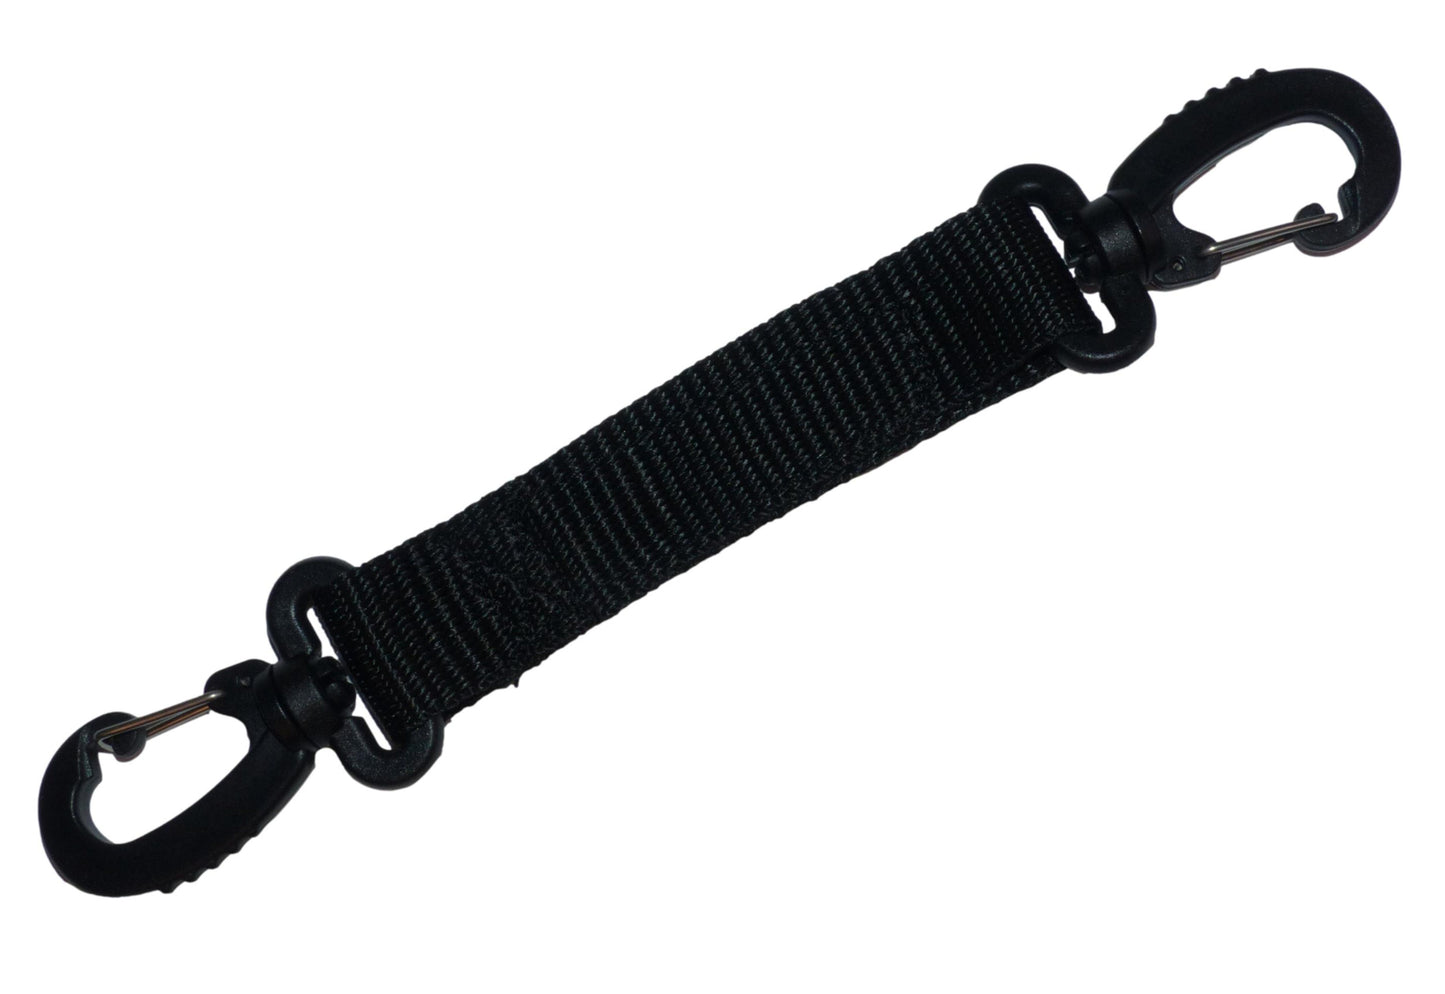 Benristraps 25mm Webbing Strap with Two Snap Hooks